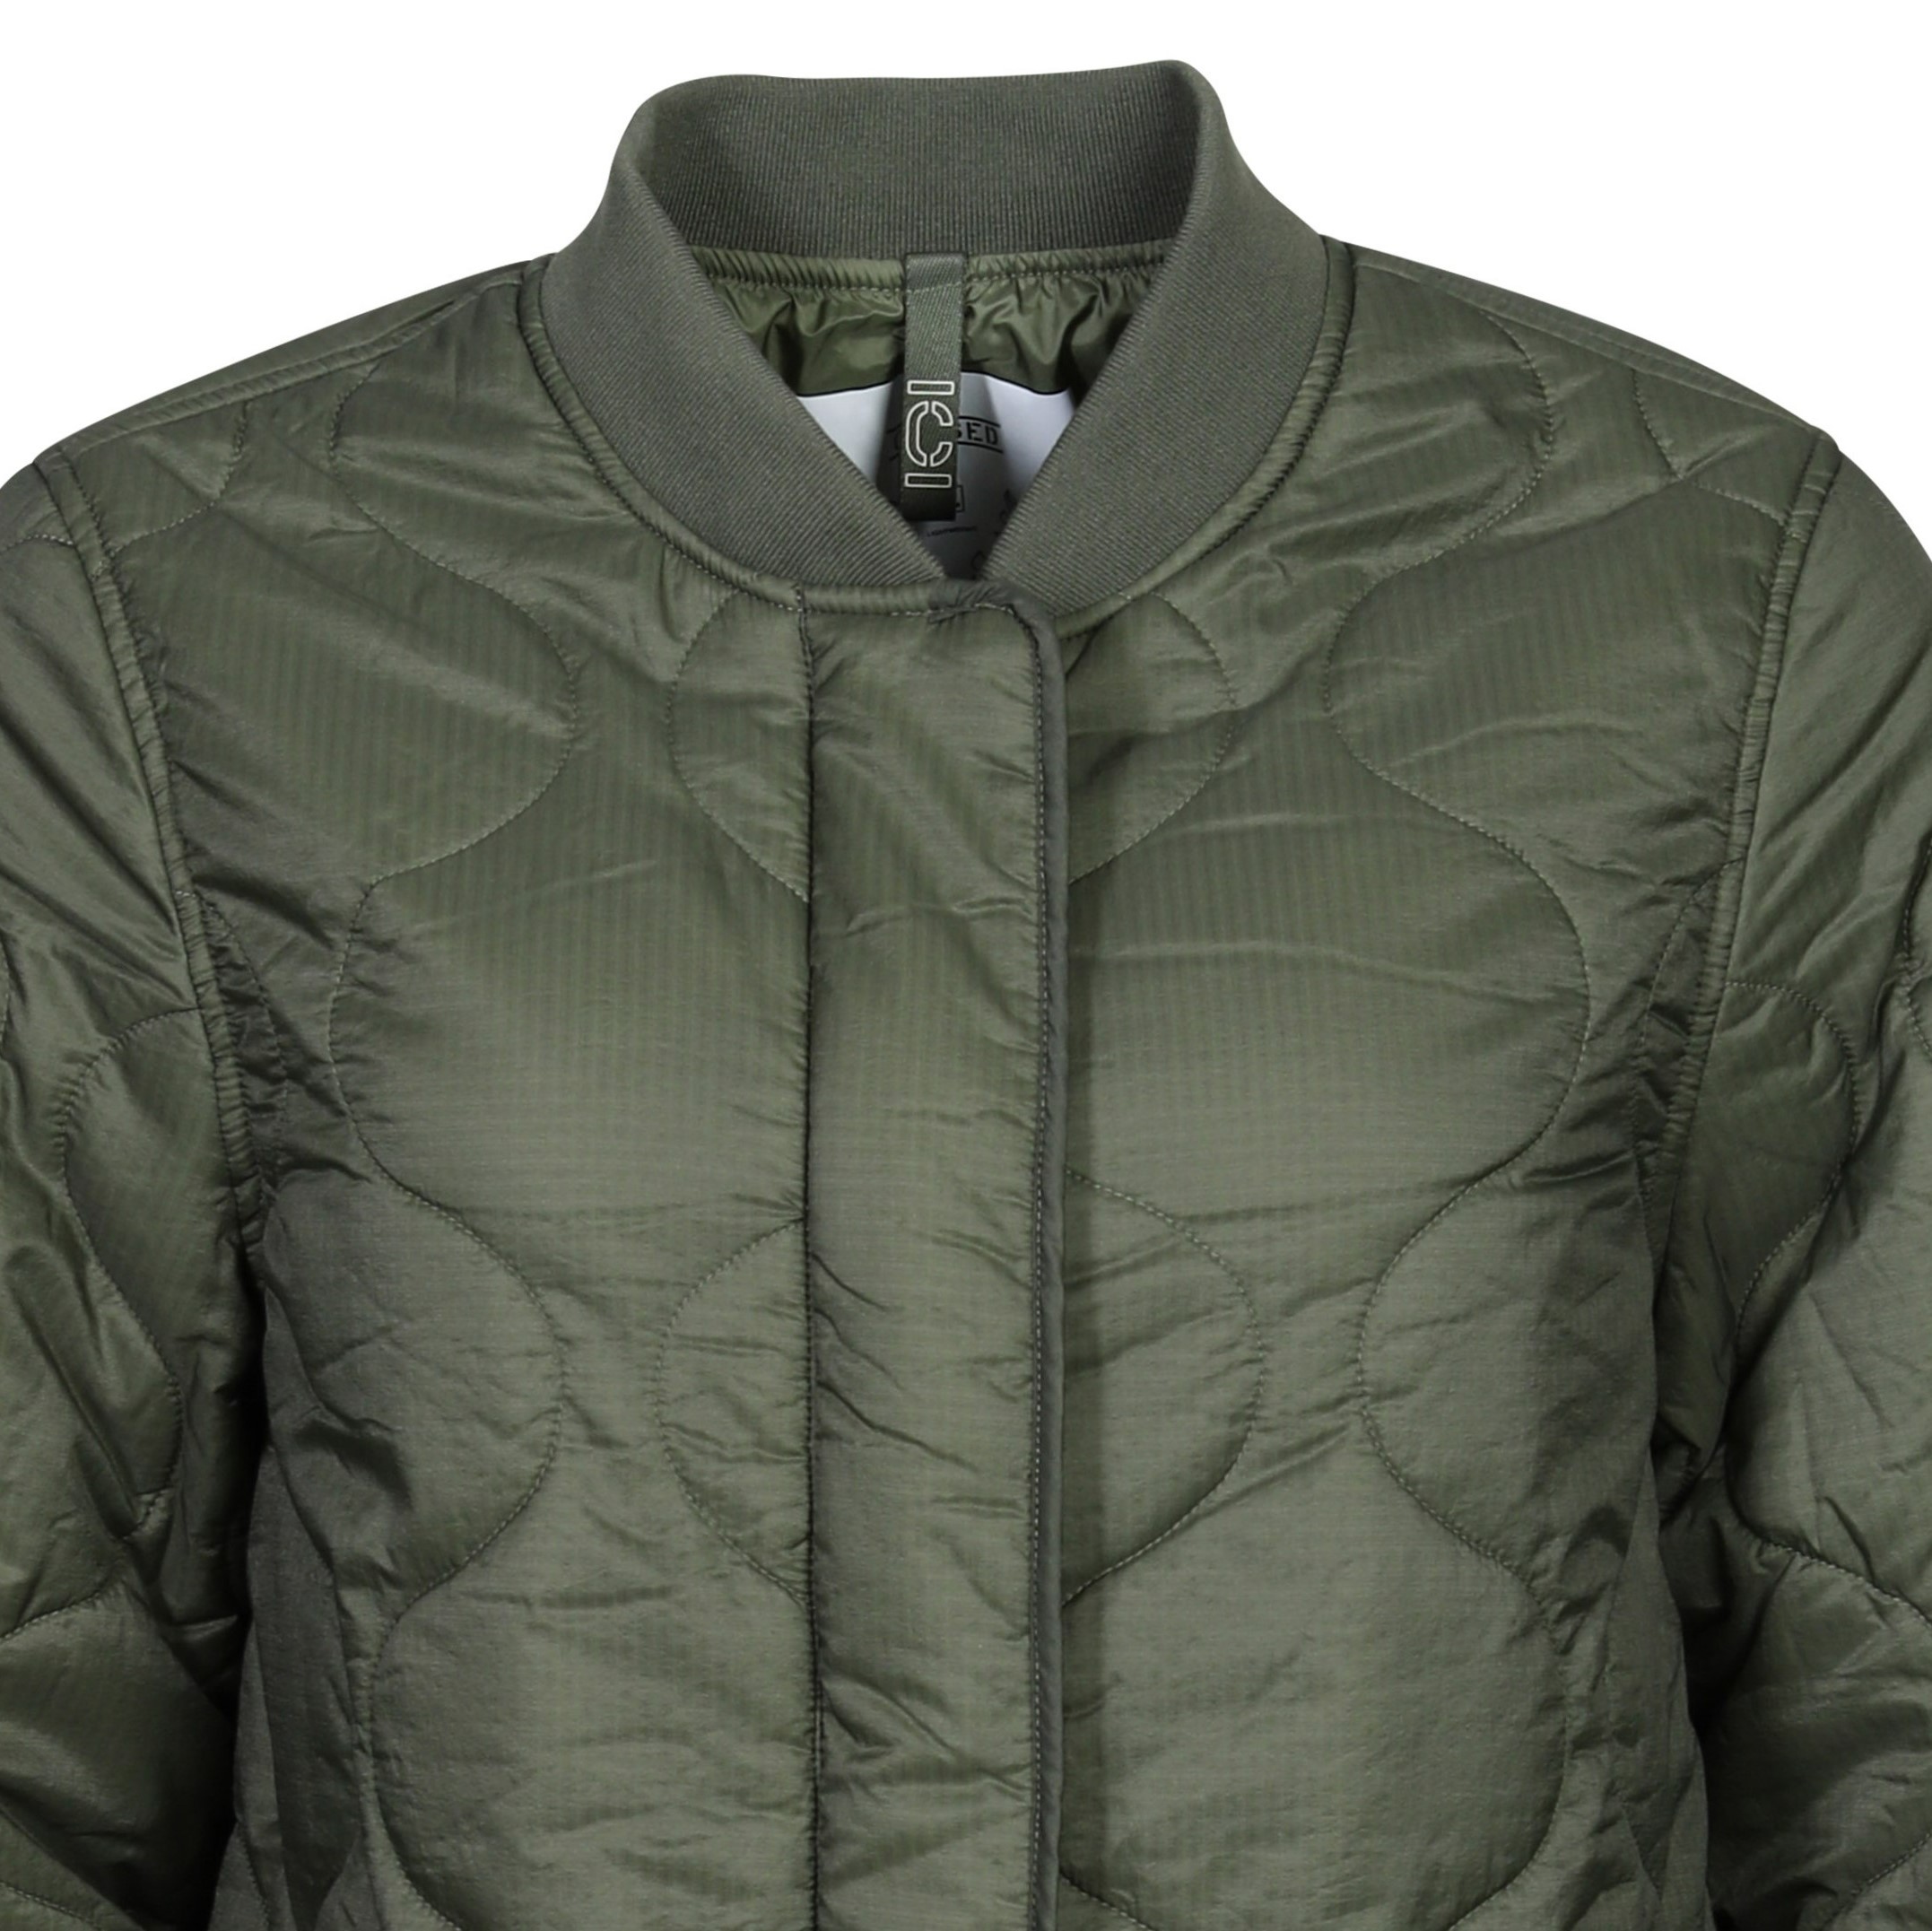 Closed Light Weight Nylon Coat in Army Green XS